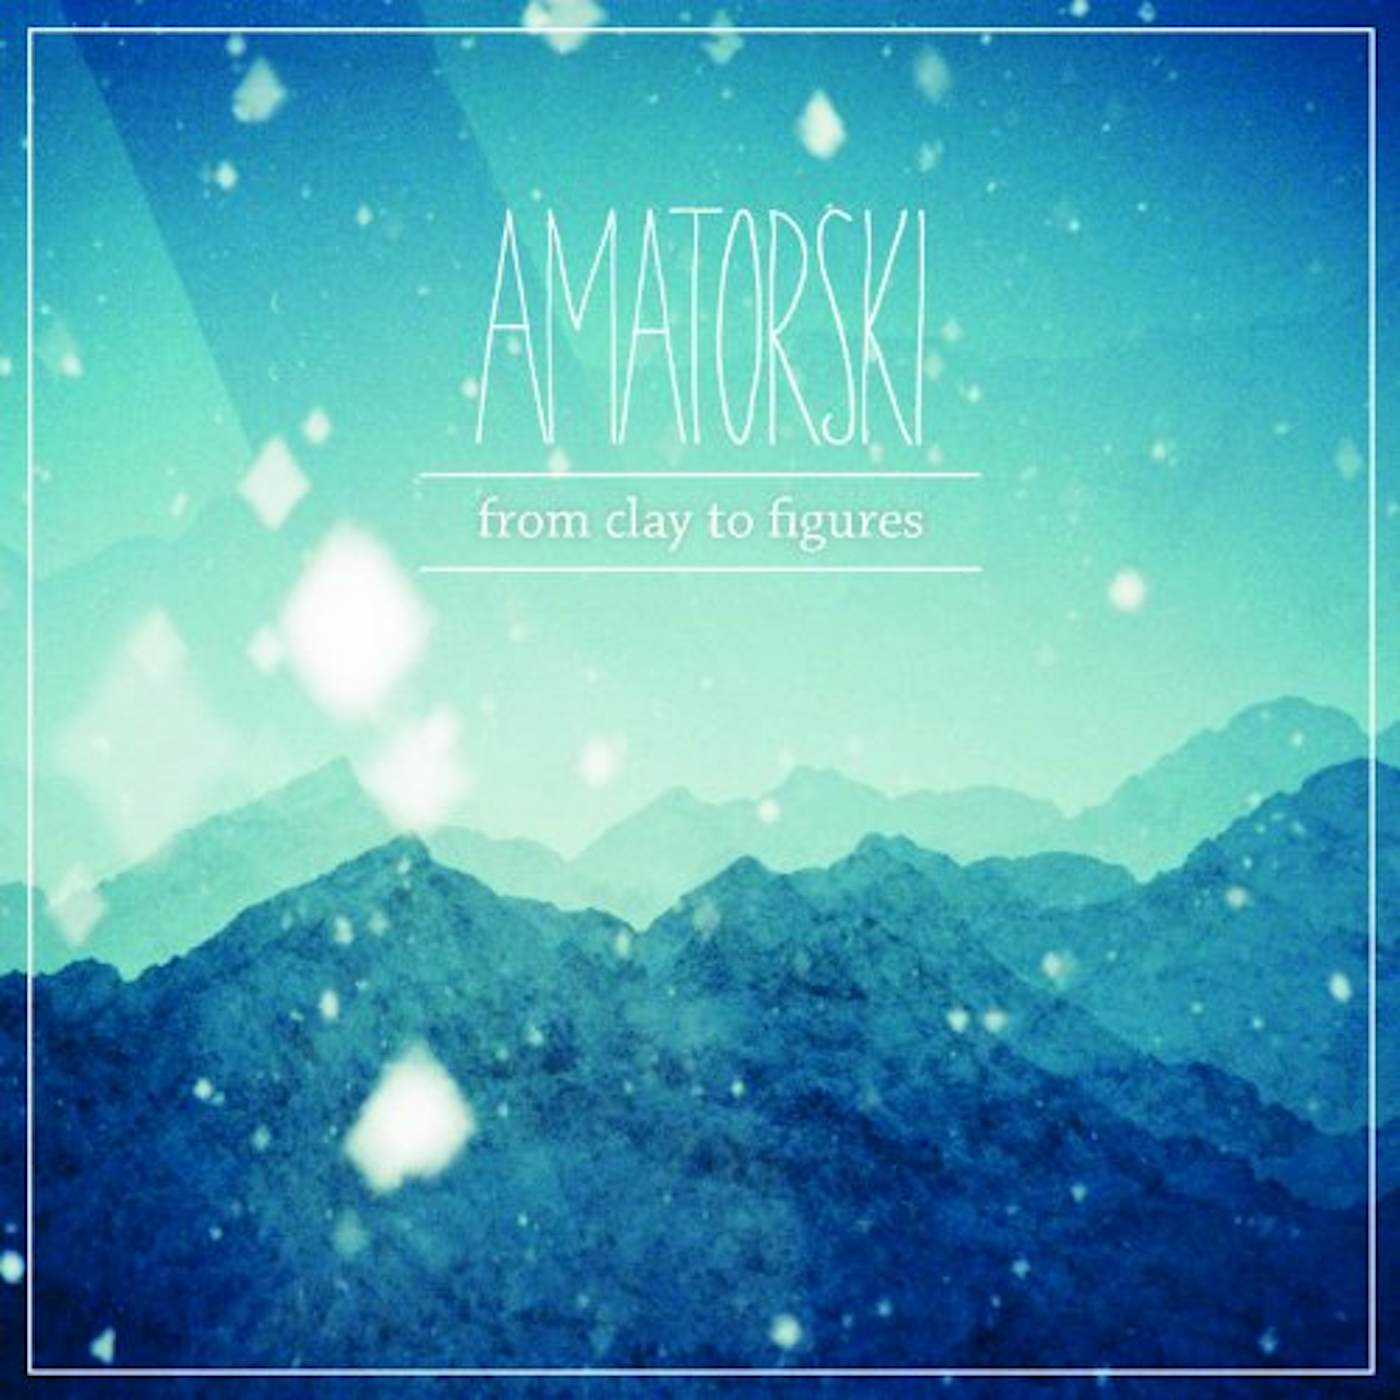 Amatorski FROM CLAY TO FIGURES Vinyl Record - UK Release